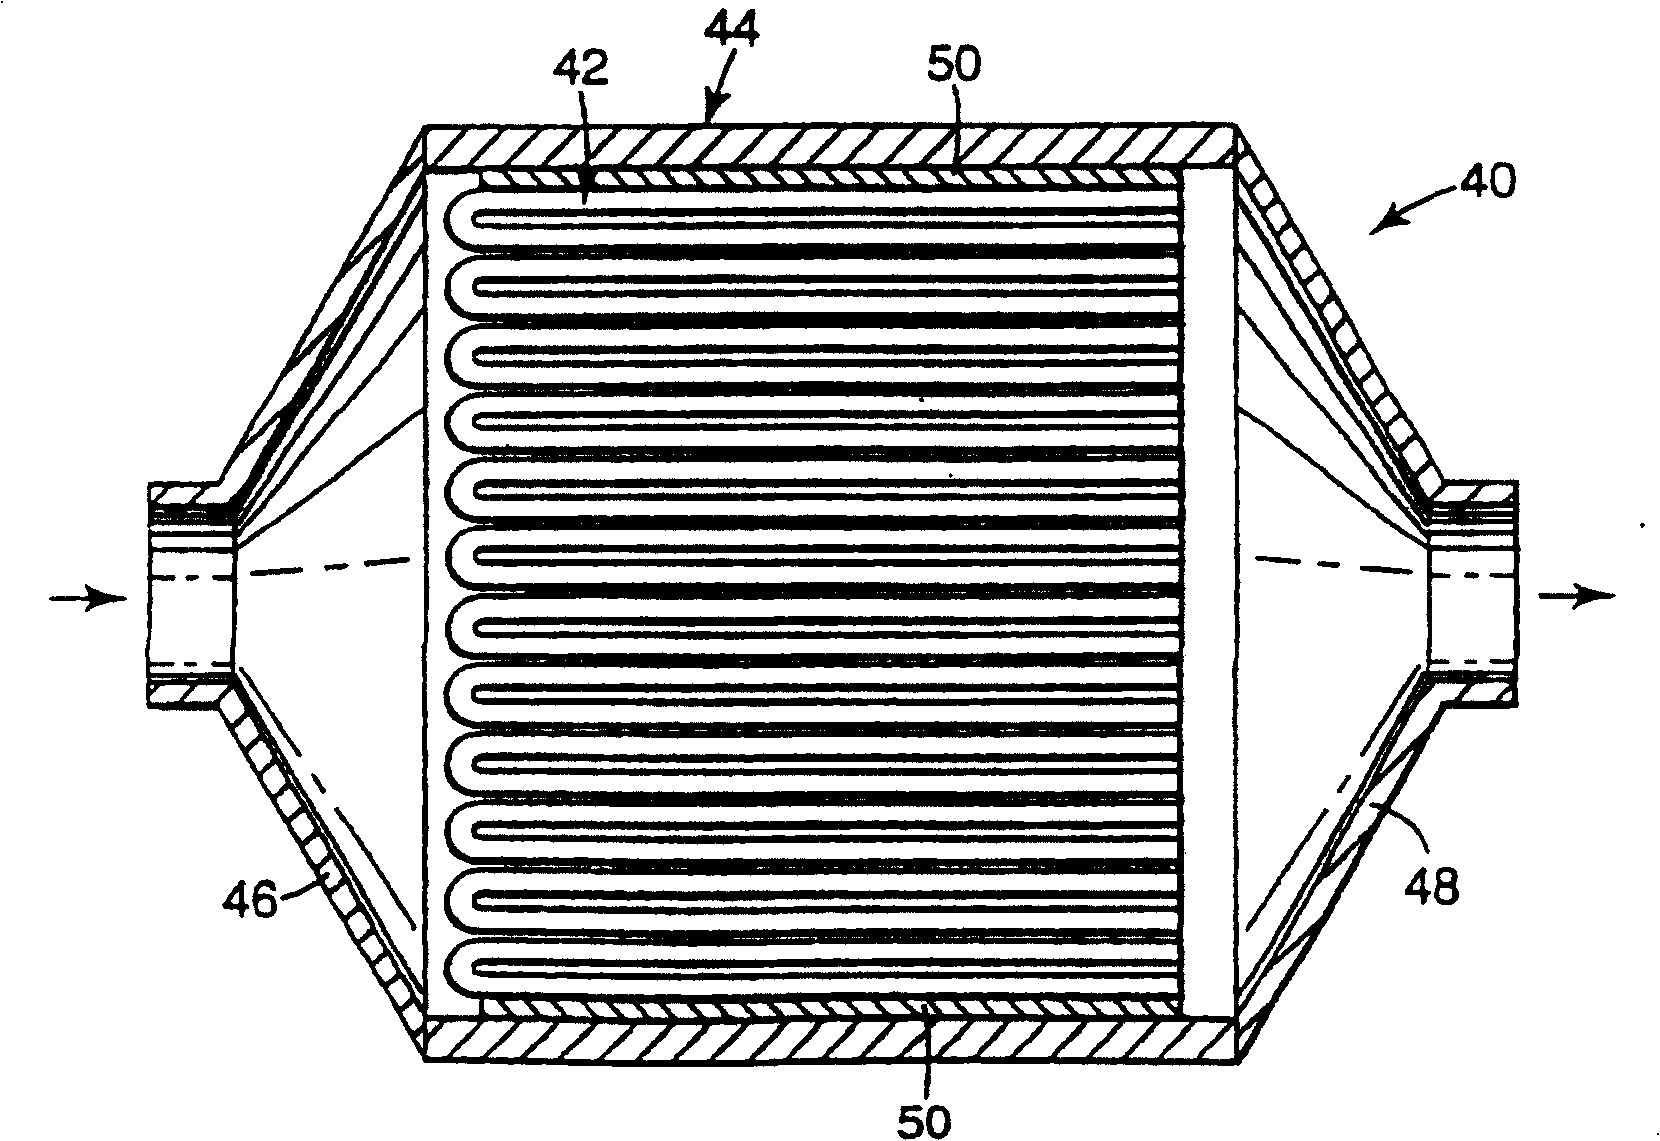 Multilayer intumescent sheet and pollution control device